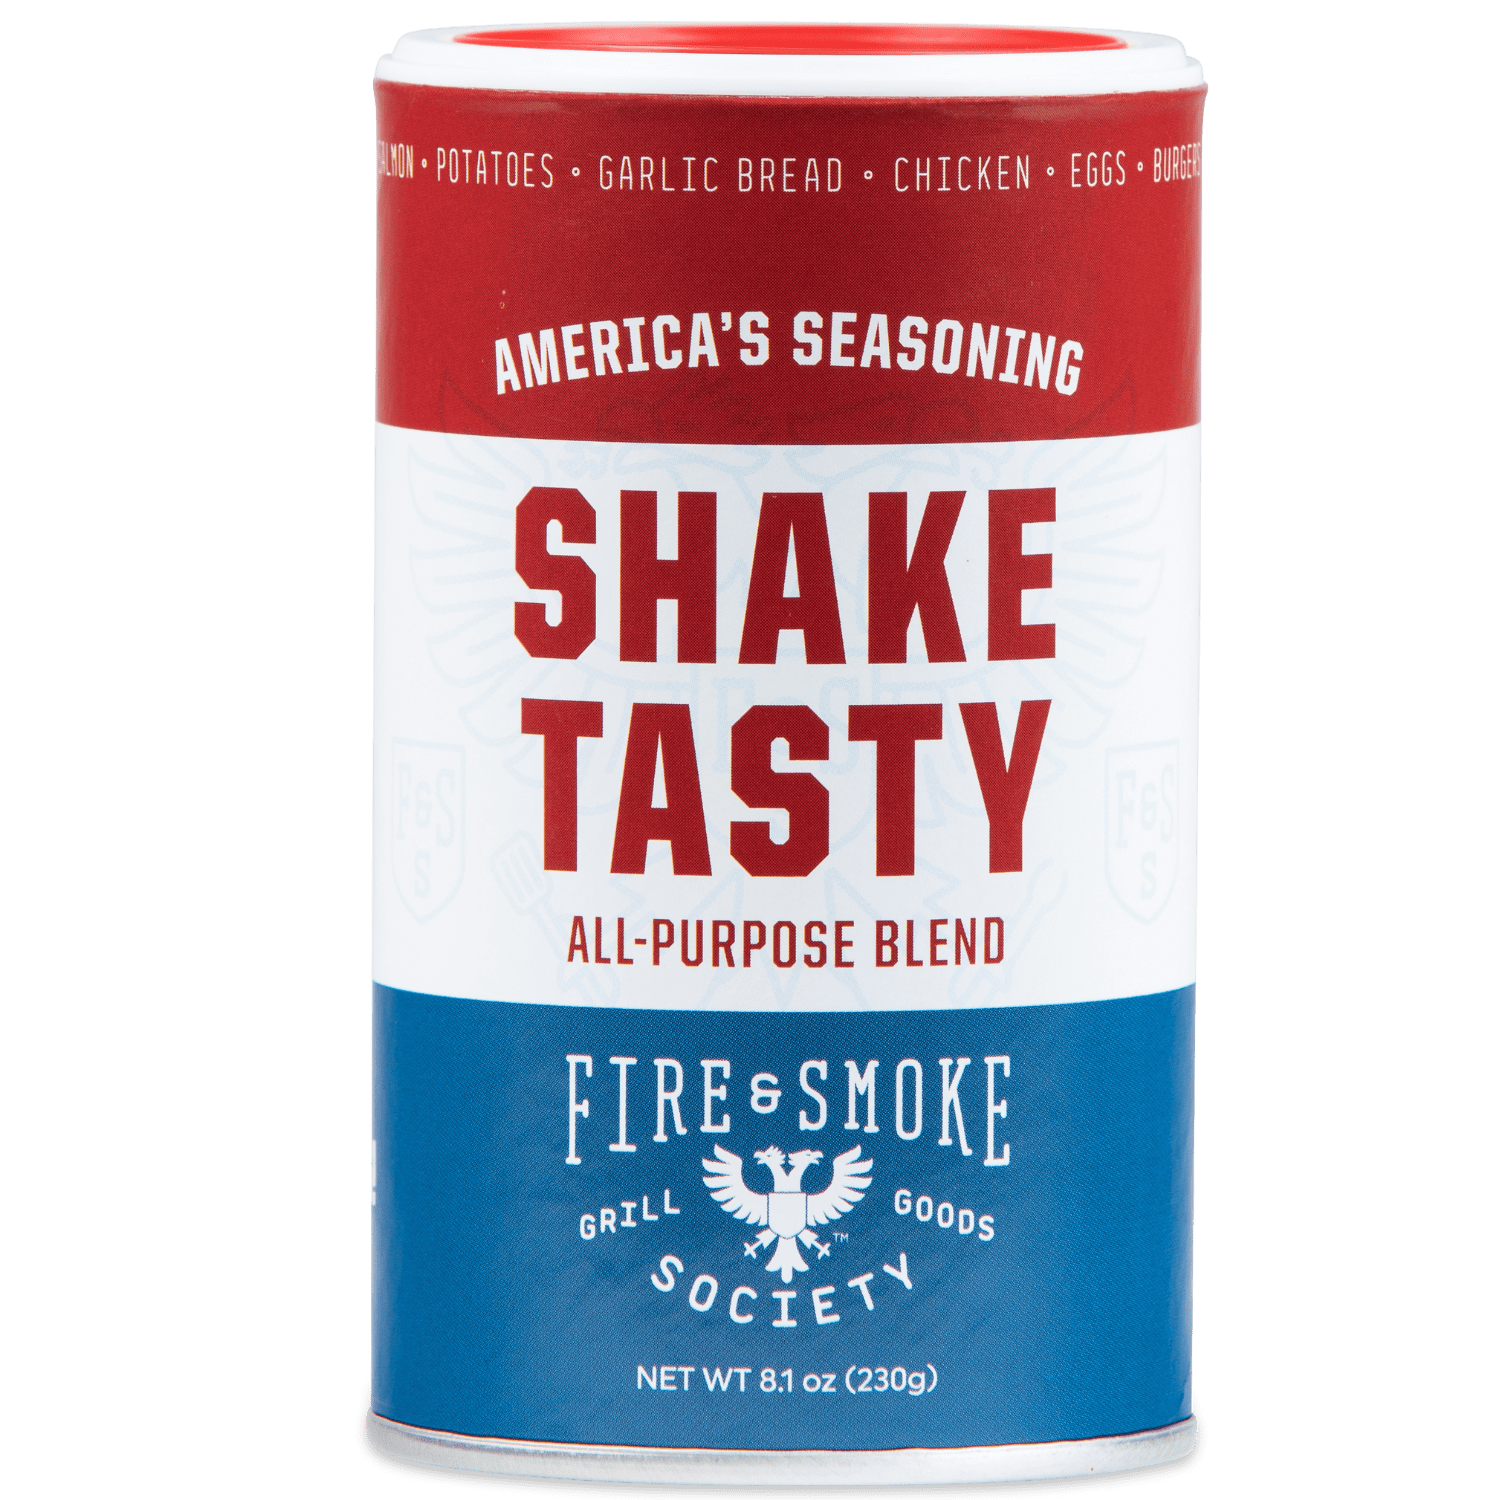 Fire and Smoke The Usual All Purpose Seasoning, 10.7 Ounce -- 6 per case